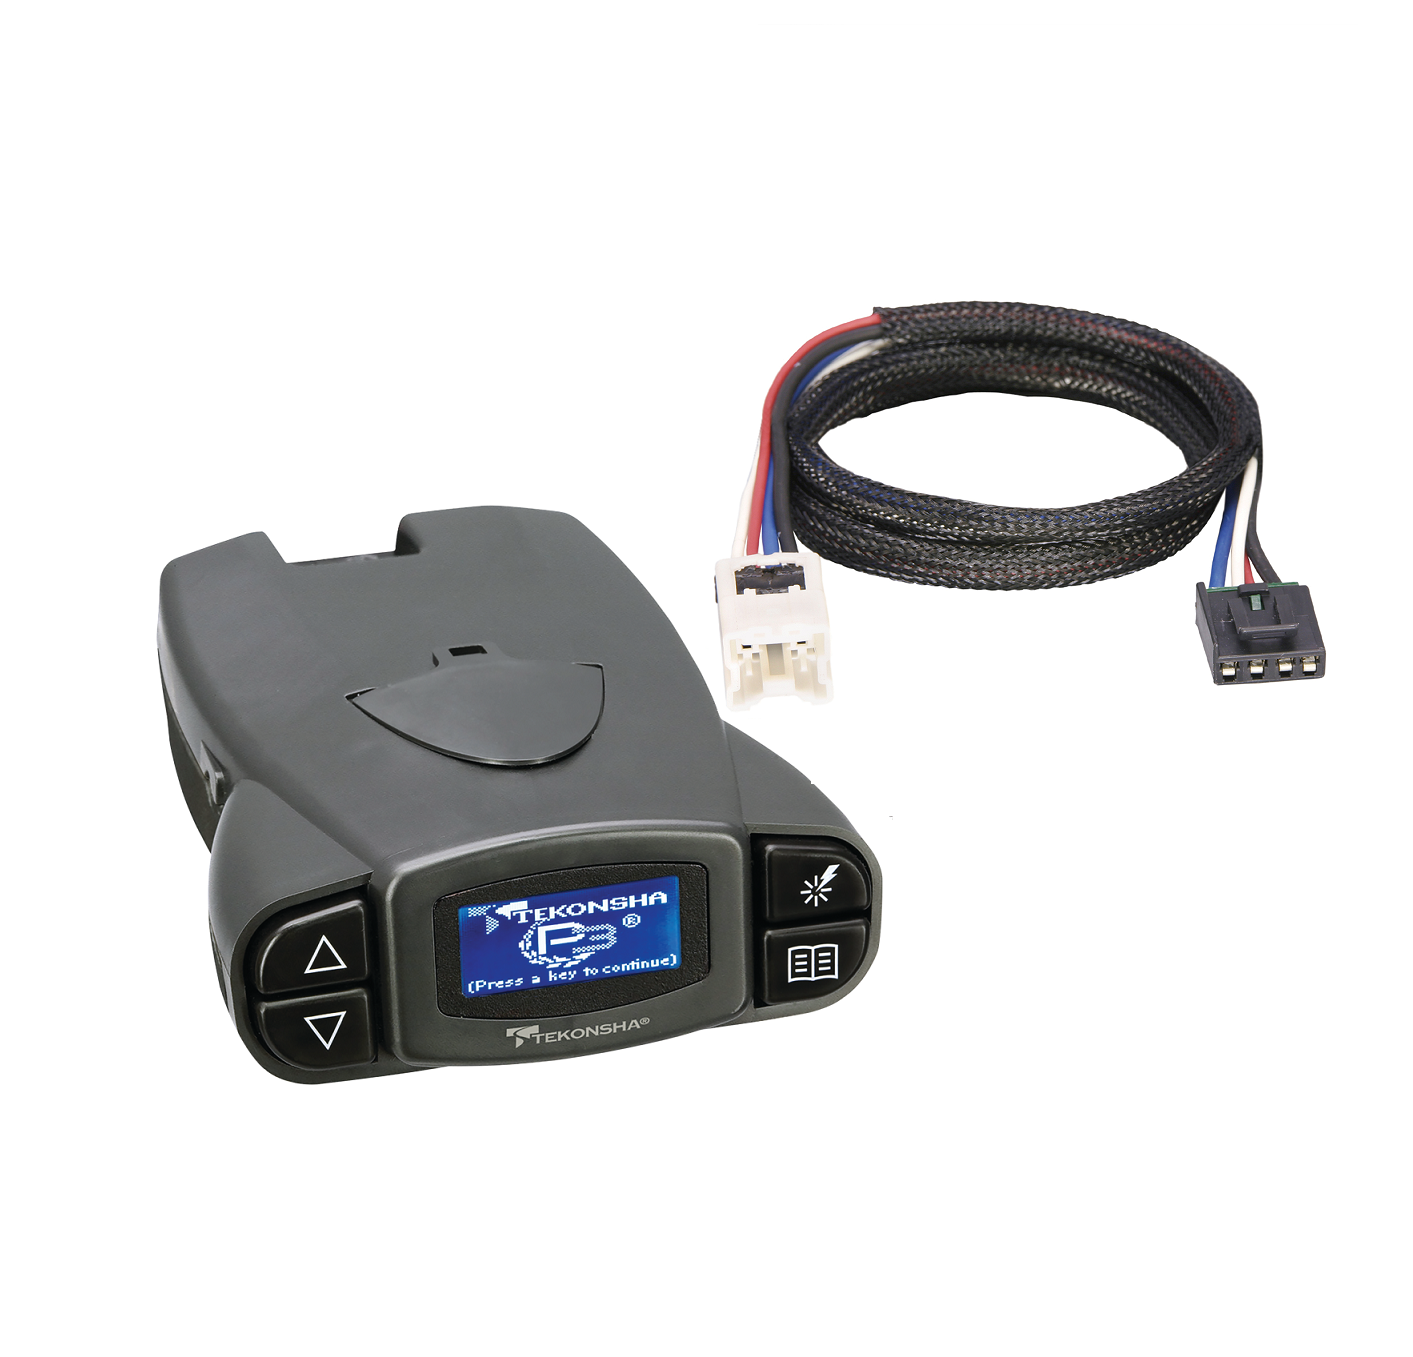 2013-2021 Nissan NV1500 3050 Tekonsha Prodigy P3 Proportional Brake Controller for Trailers with 1-4 Axles 90195 w/ Plug-N-Play Wire